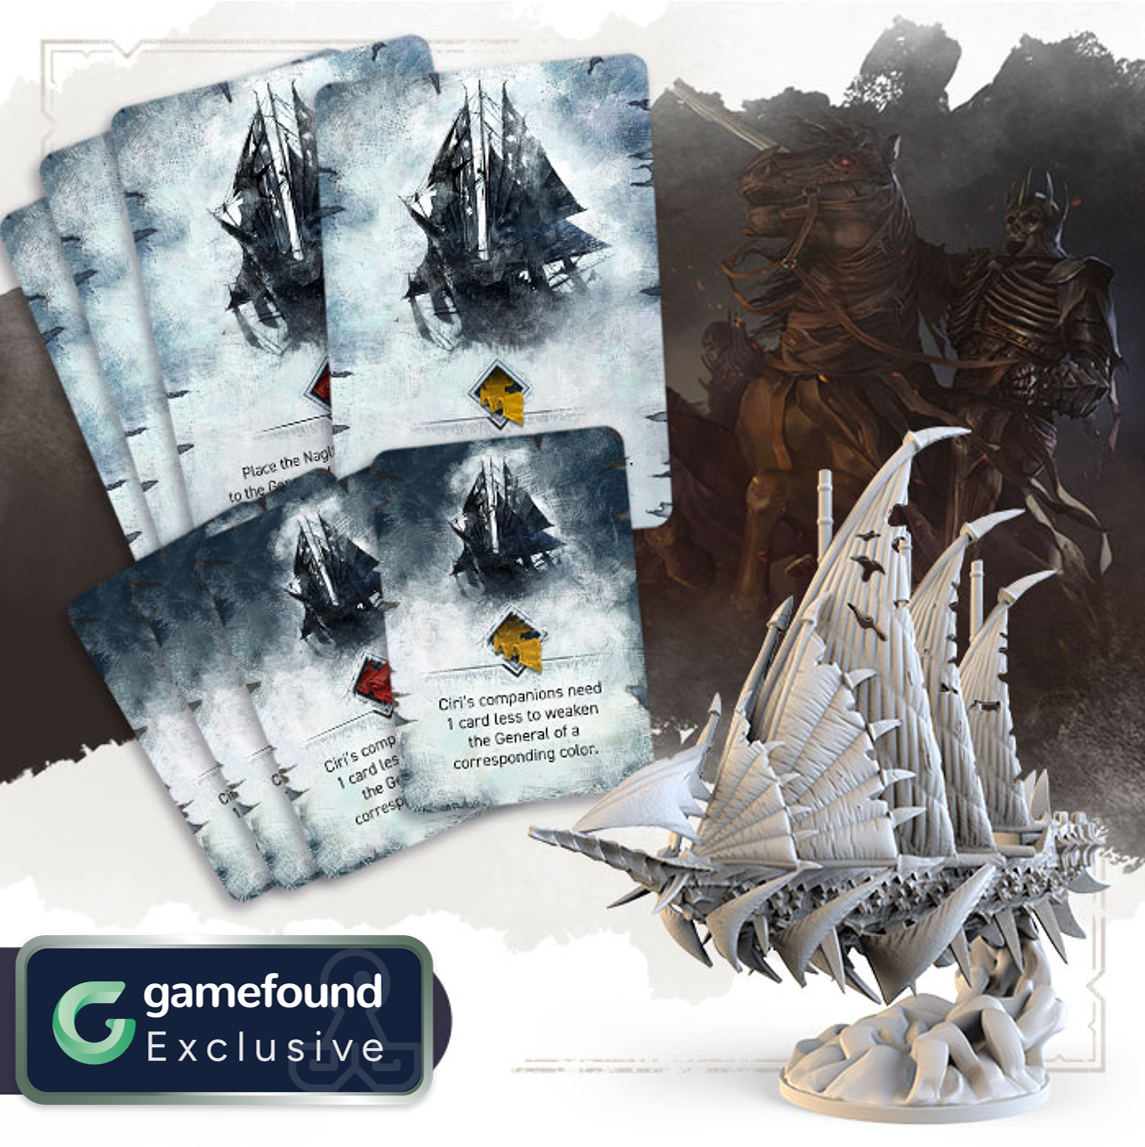 Gamefound Exclusive The Witcher: Path of Destiny Board Game Naglfar Expansion